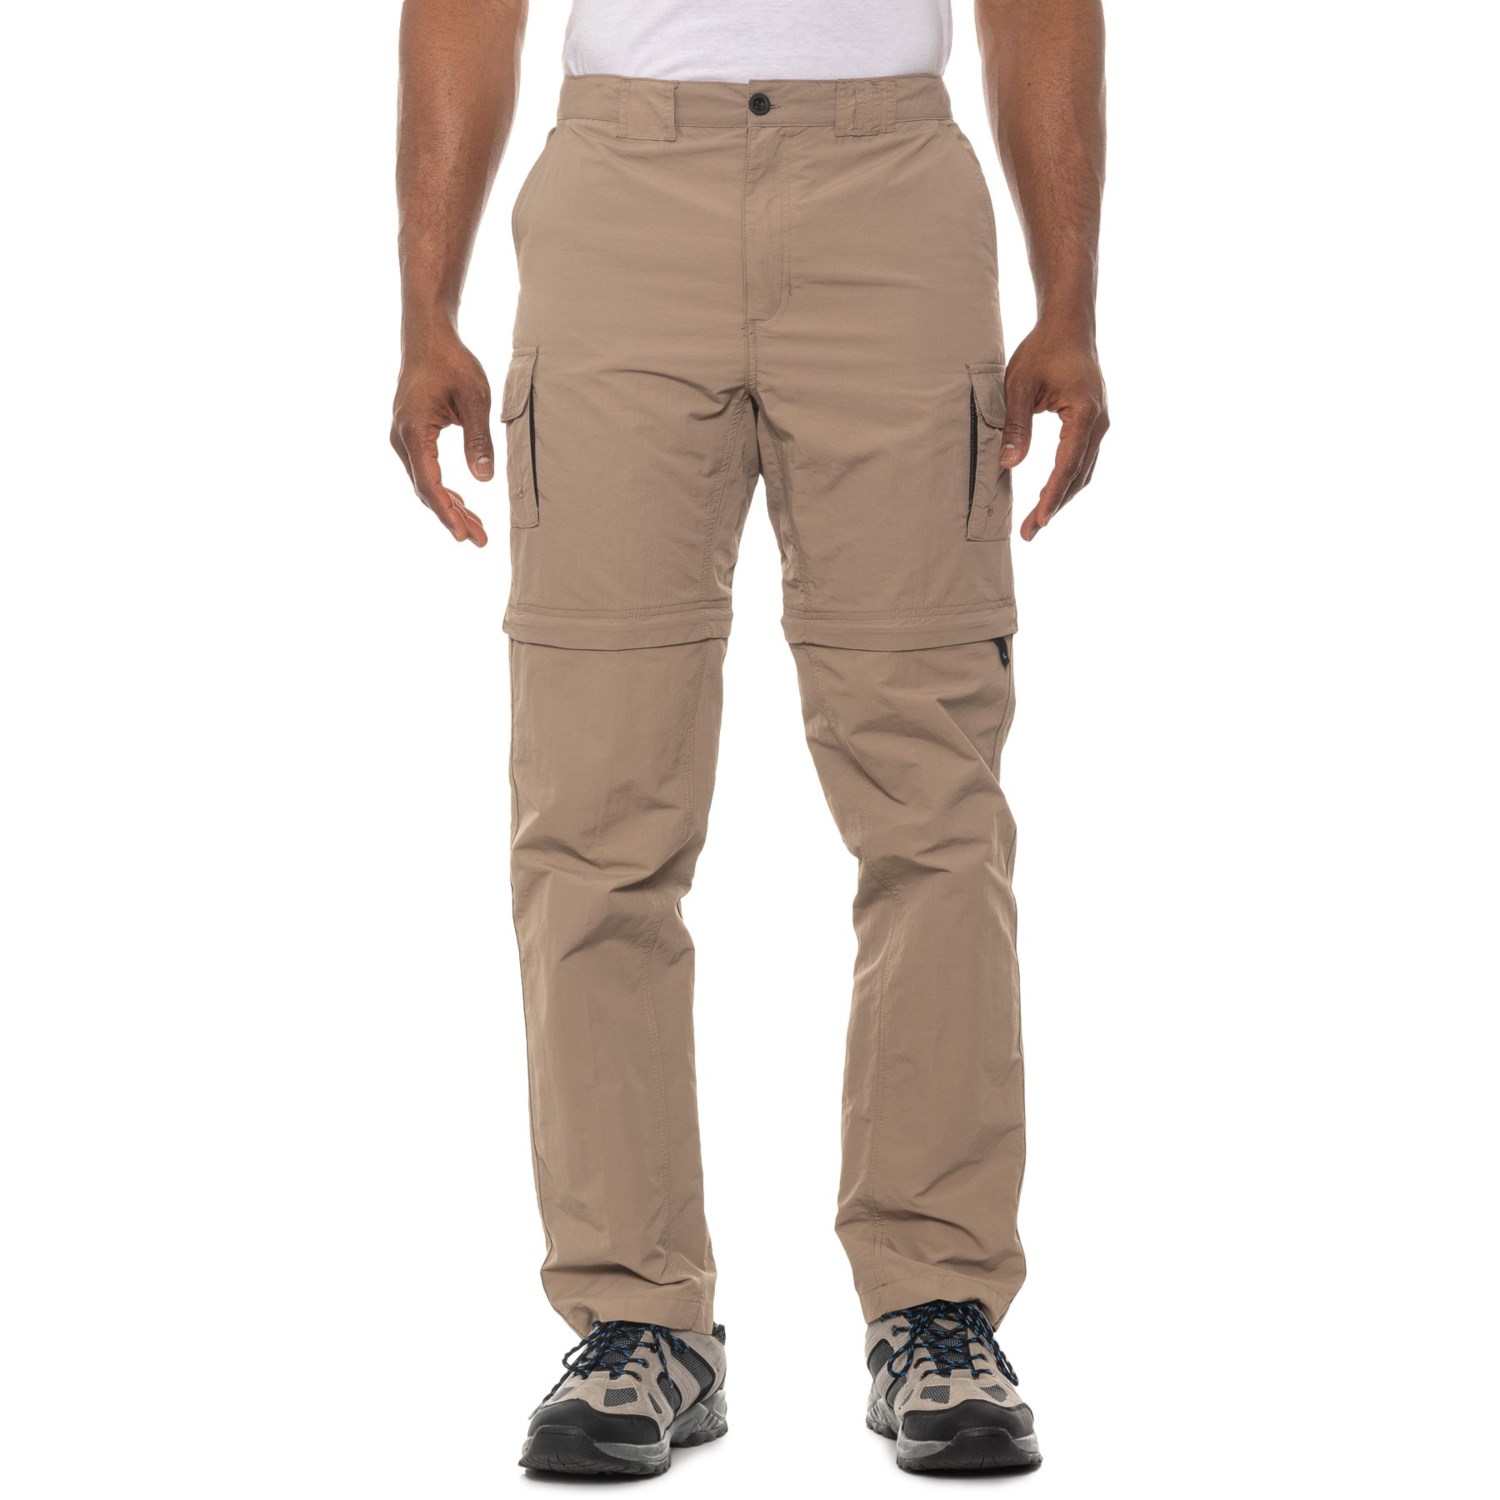 Swiss Alps Convertible Pants (For Men) - Save 44%